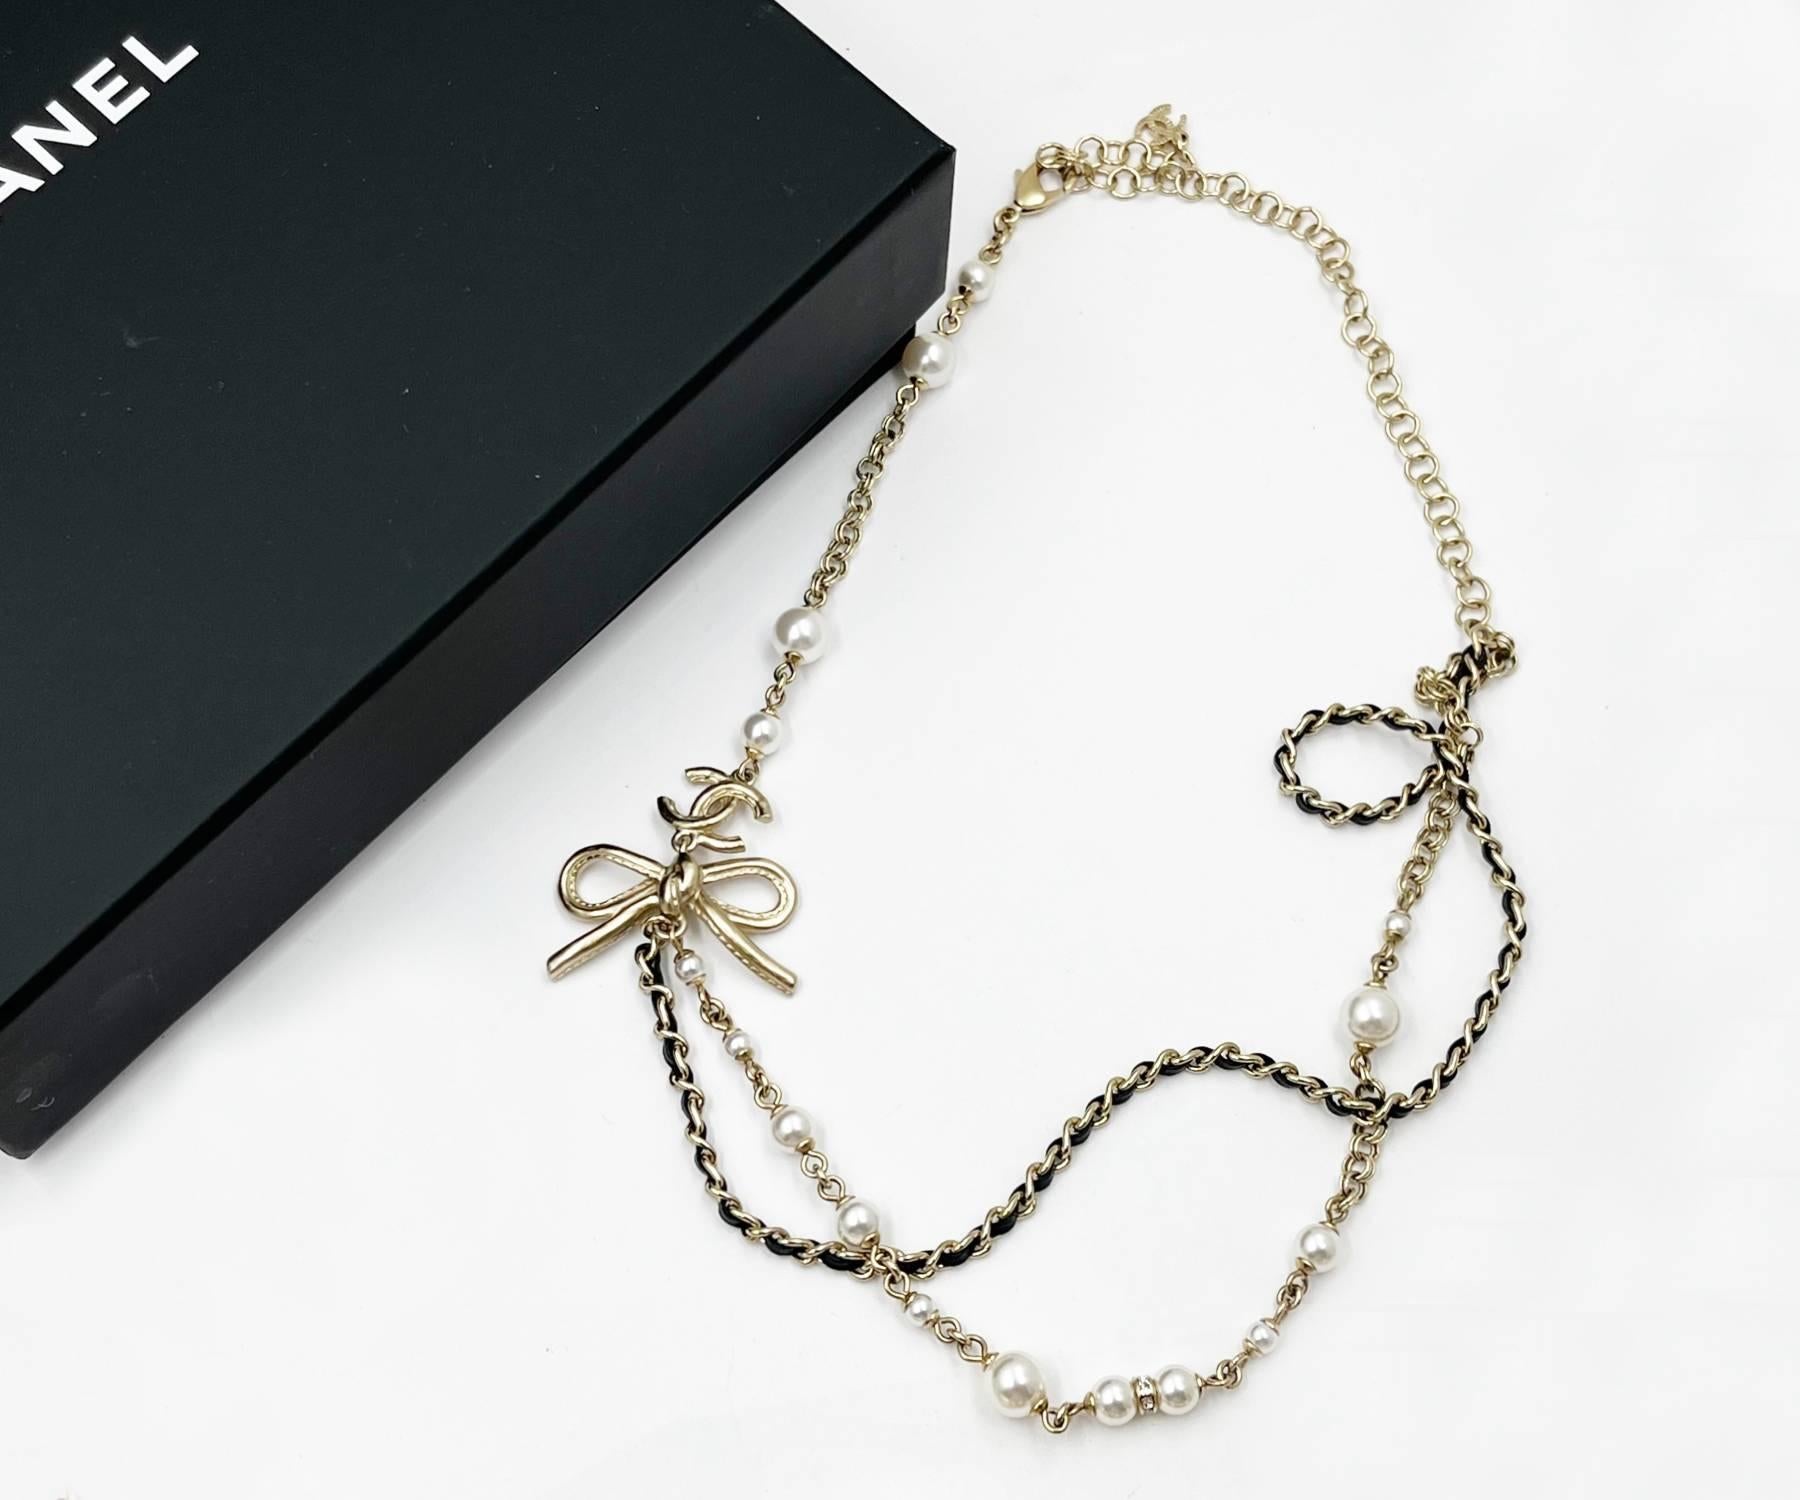 Chanel Light Gold CC Ribbon Bow Pearl Leather Chain Short Necklace

*Marked 22
*Made in France
*Comes with the original box and pouch

-The pendant is approximately 1.25″ x 1.25″ .
-The chain is approximately total 21″ long .
-In a pristine